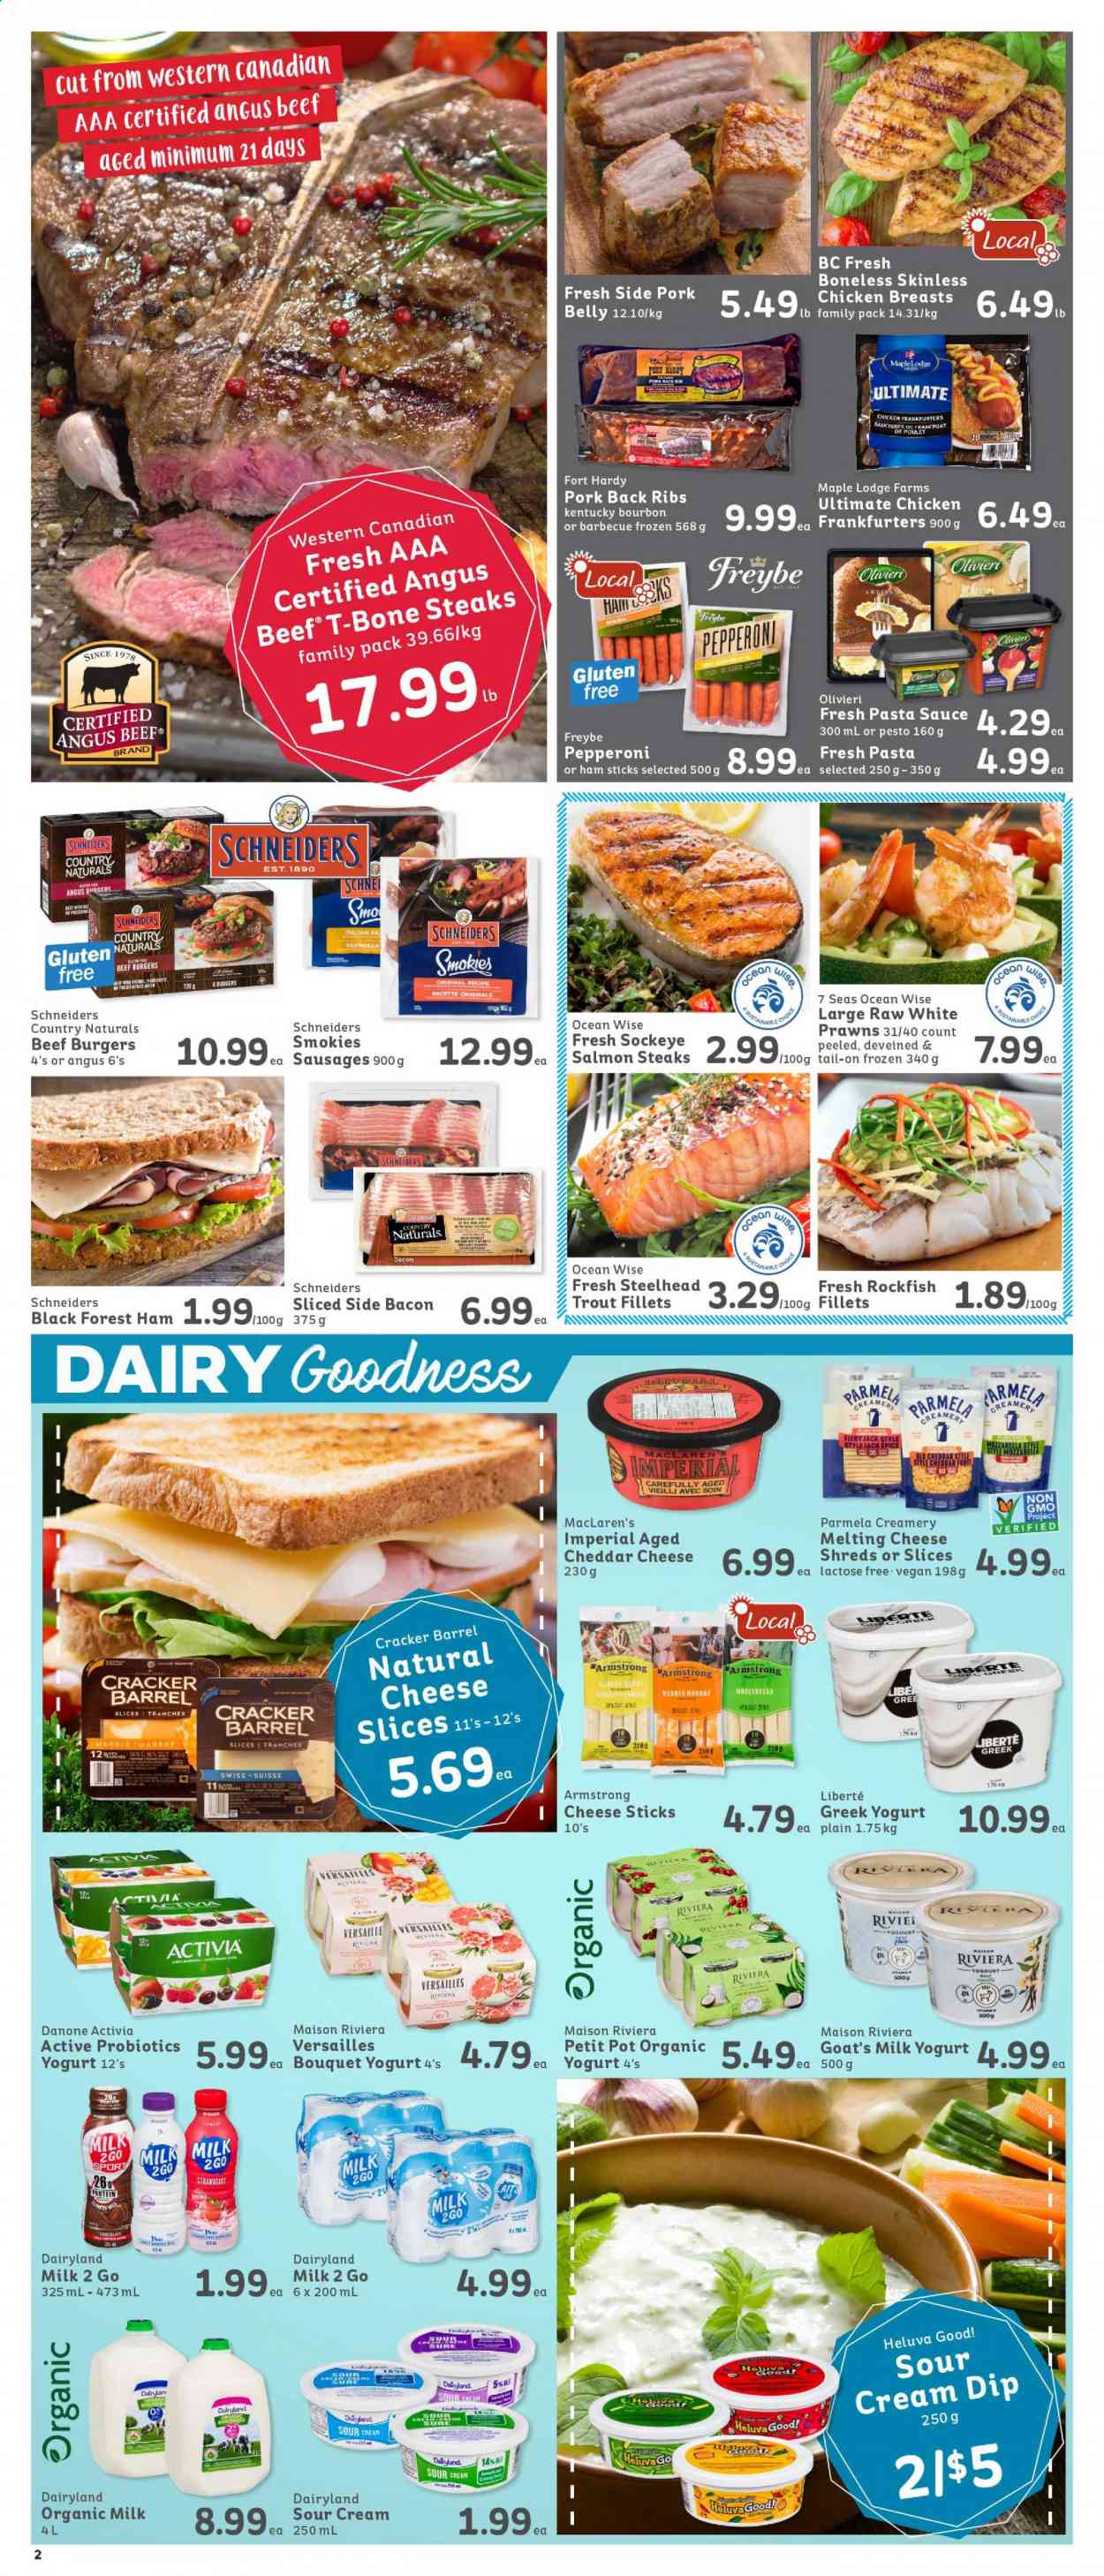 IGA Simple Goodness flyer  - July 23, 2021 - July 29, 2021.